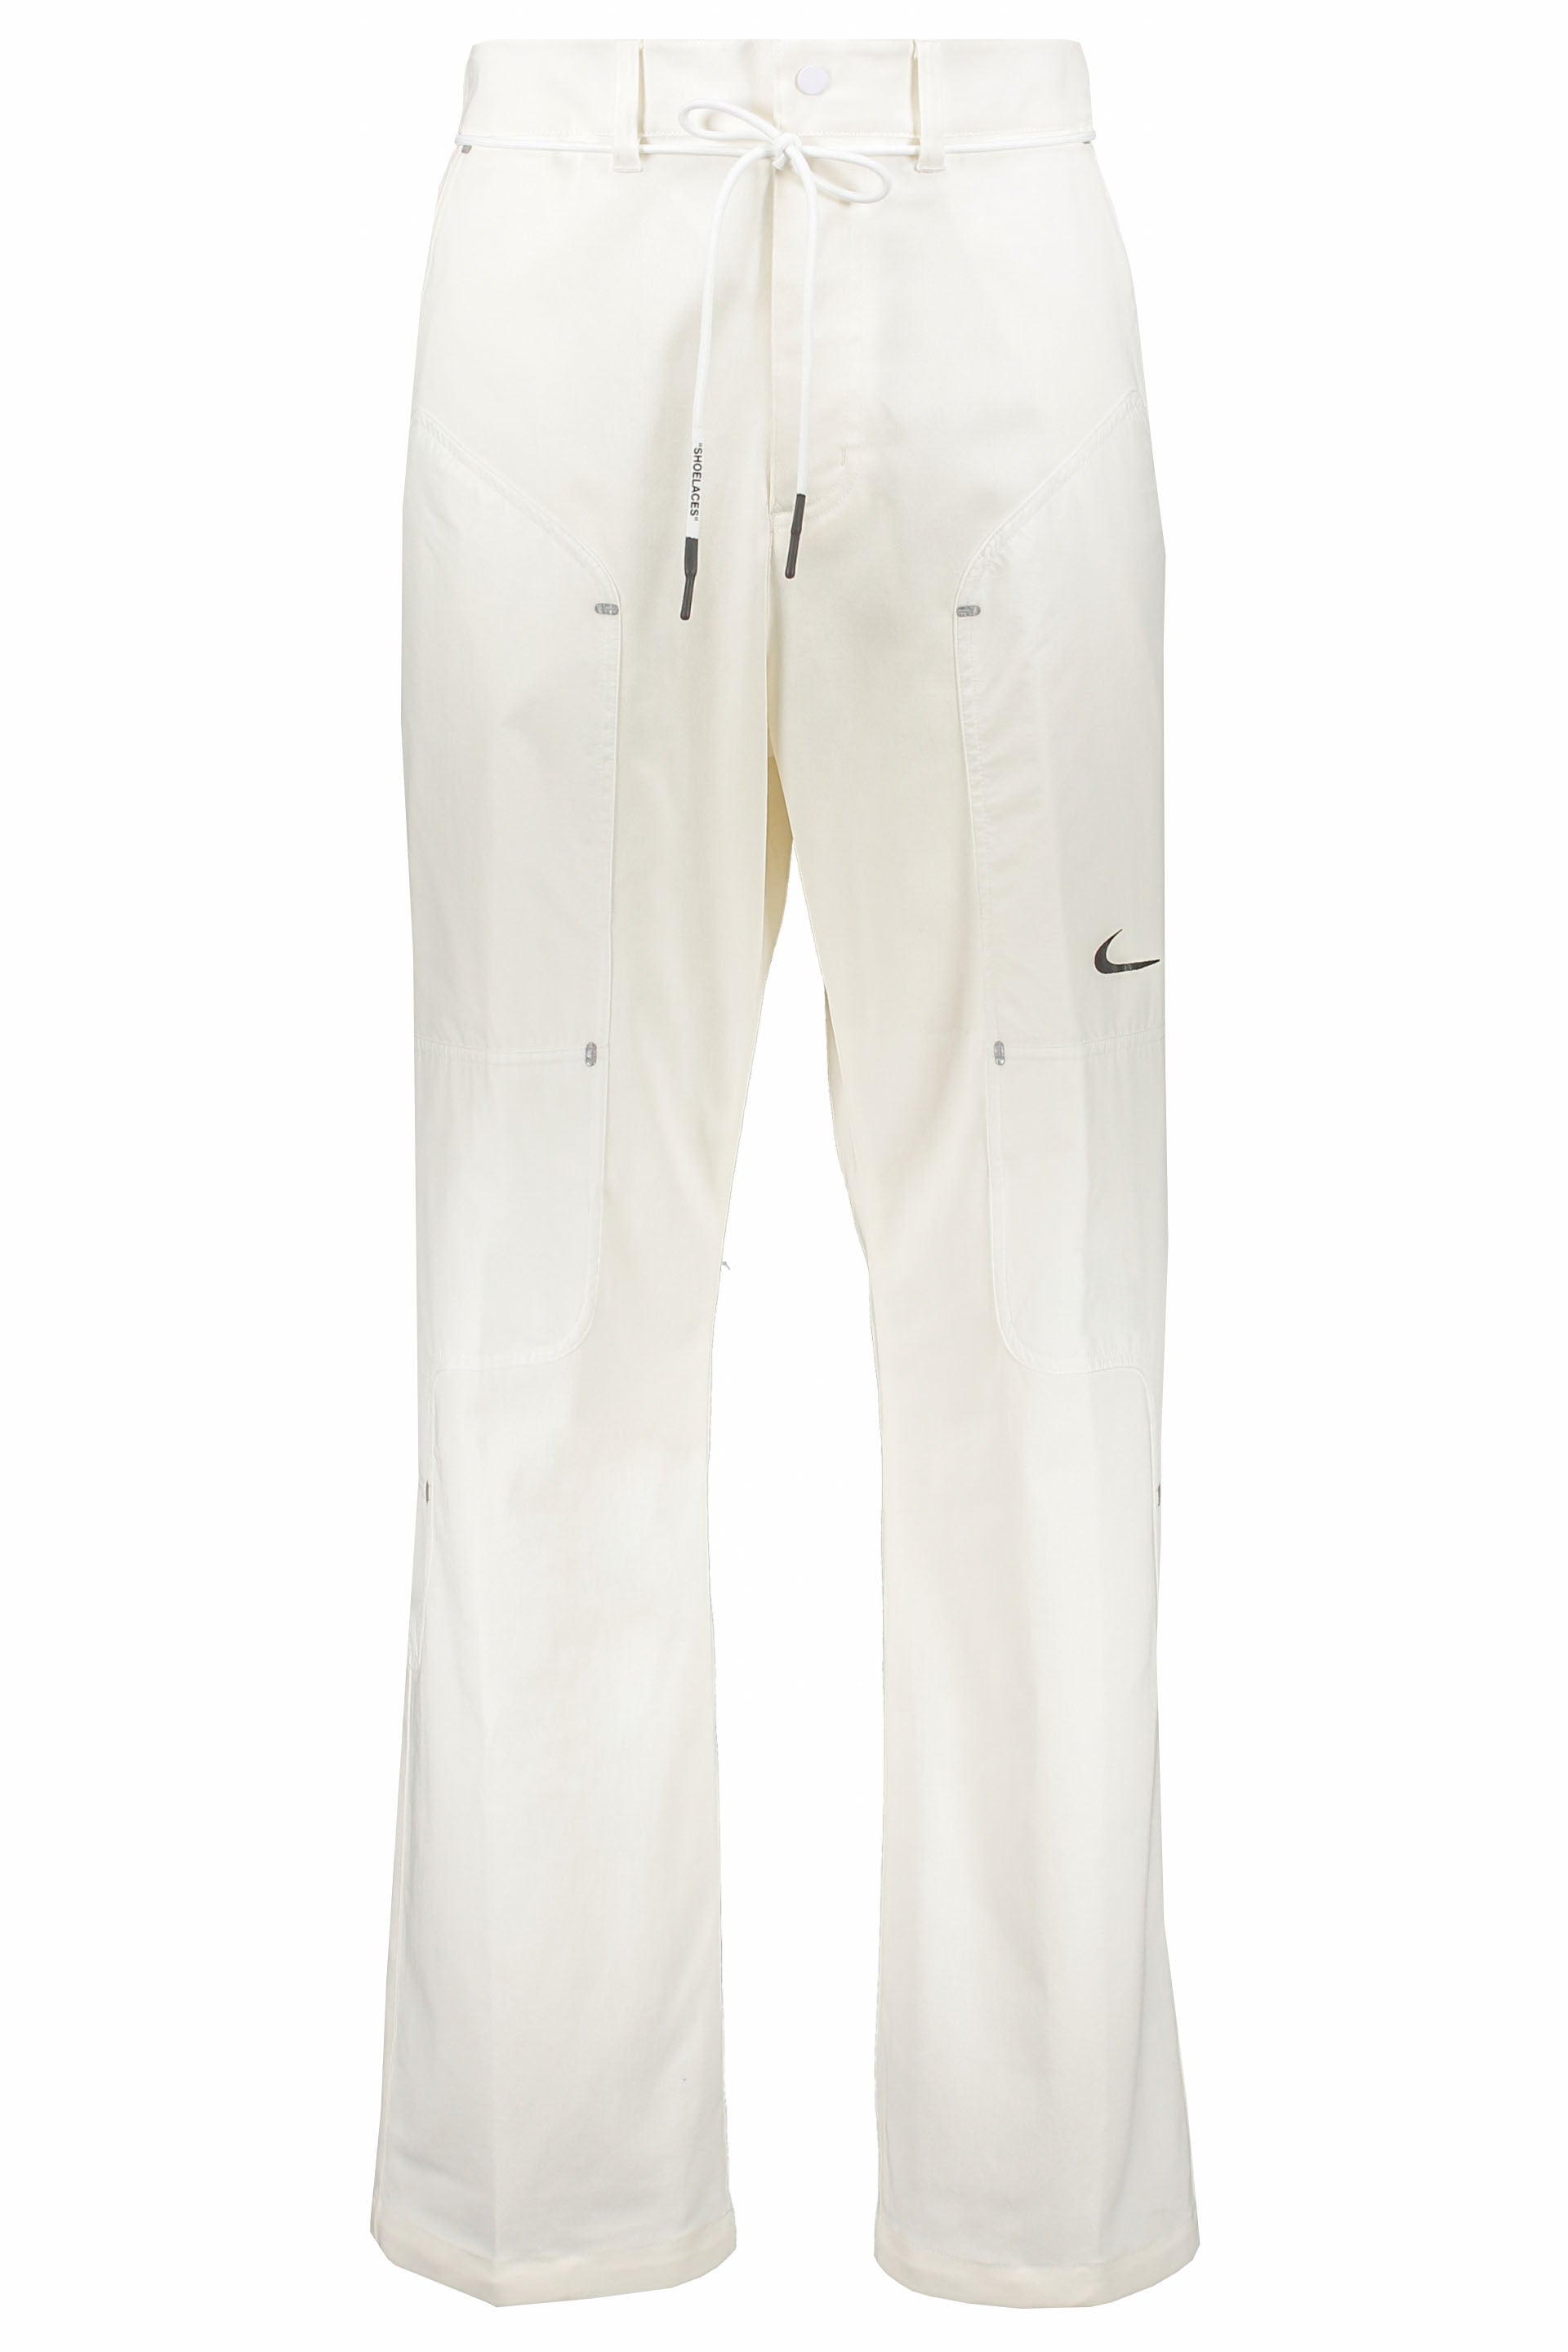 Off-White-OUTLET-SALE-Nike-x-Off-White-track-pants-Hosen-L-ARCHIVE-COLLECTION.jpg